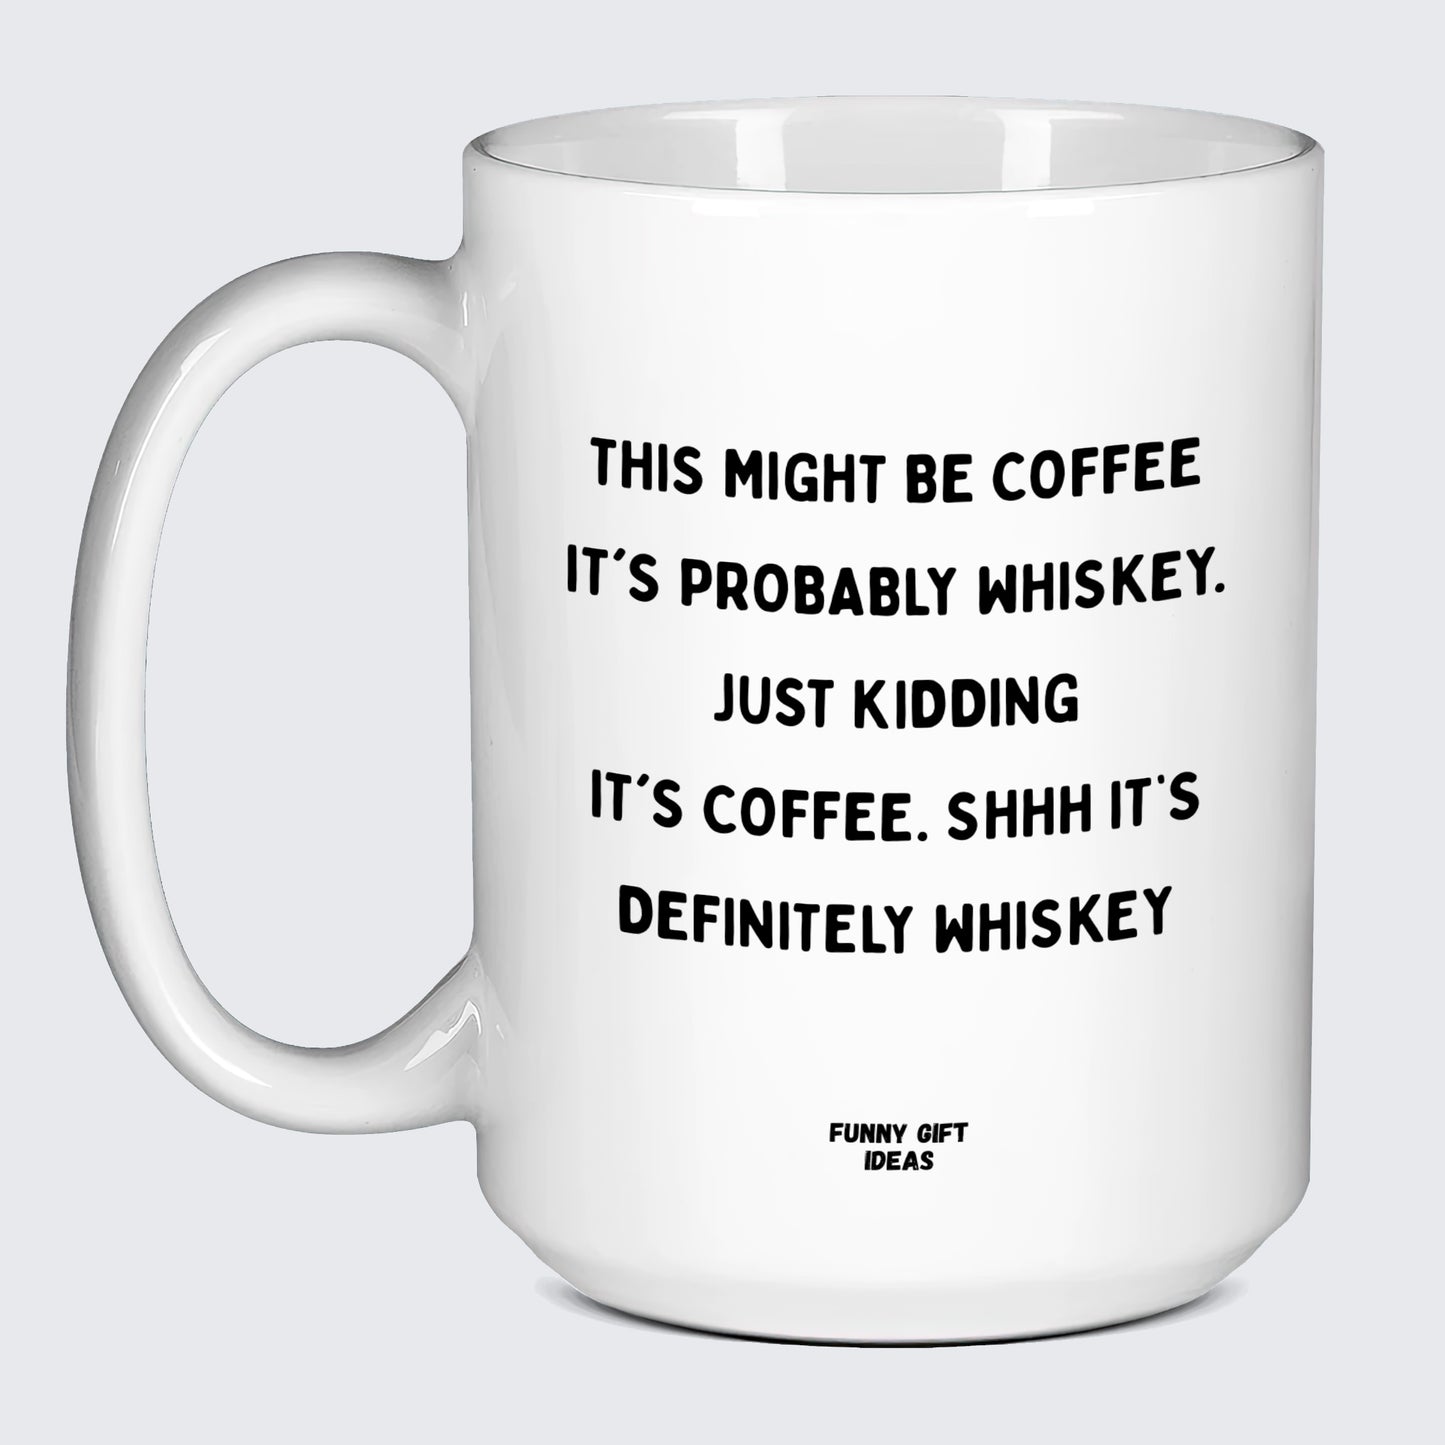 Cool Mugs This Might Be Coffee It's Probably Whiskey. Just Kidding It's Coffee. Shhh Its Definitely Whiskey - Funny Gift Ideas